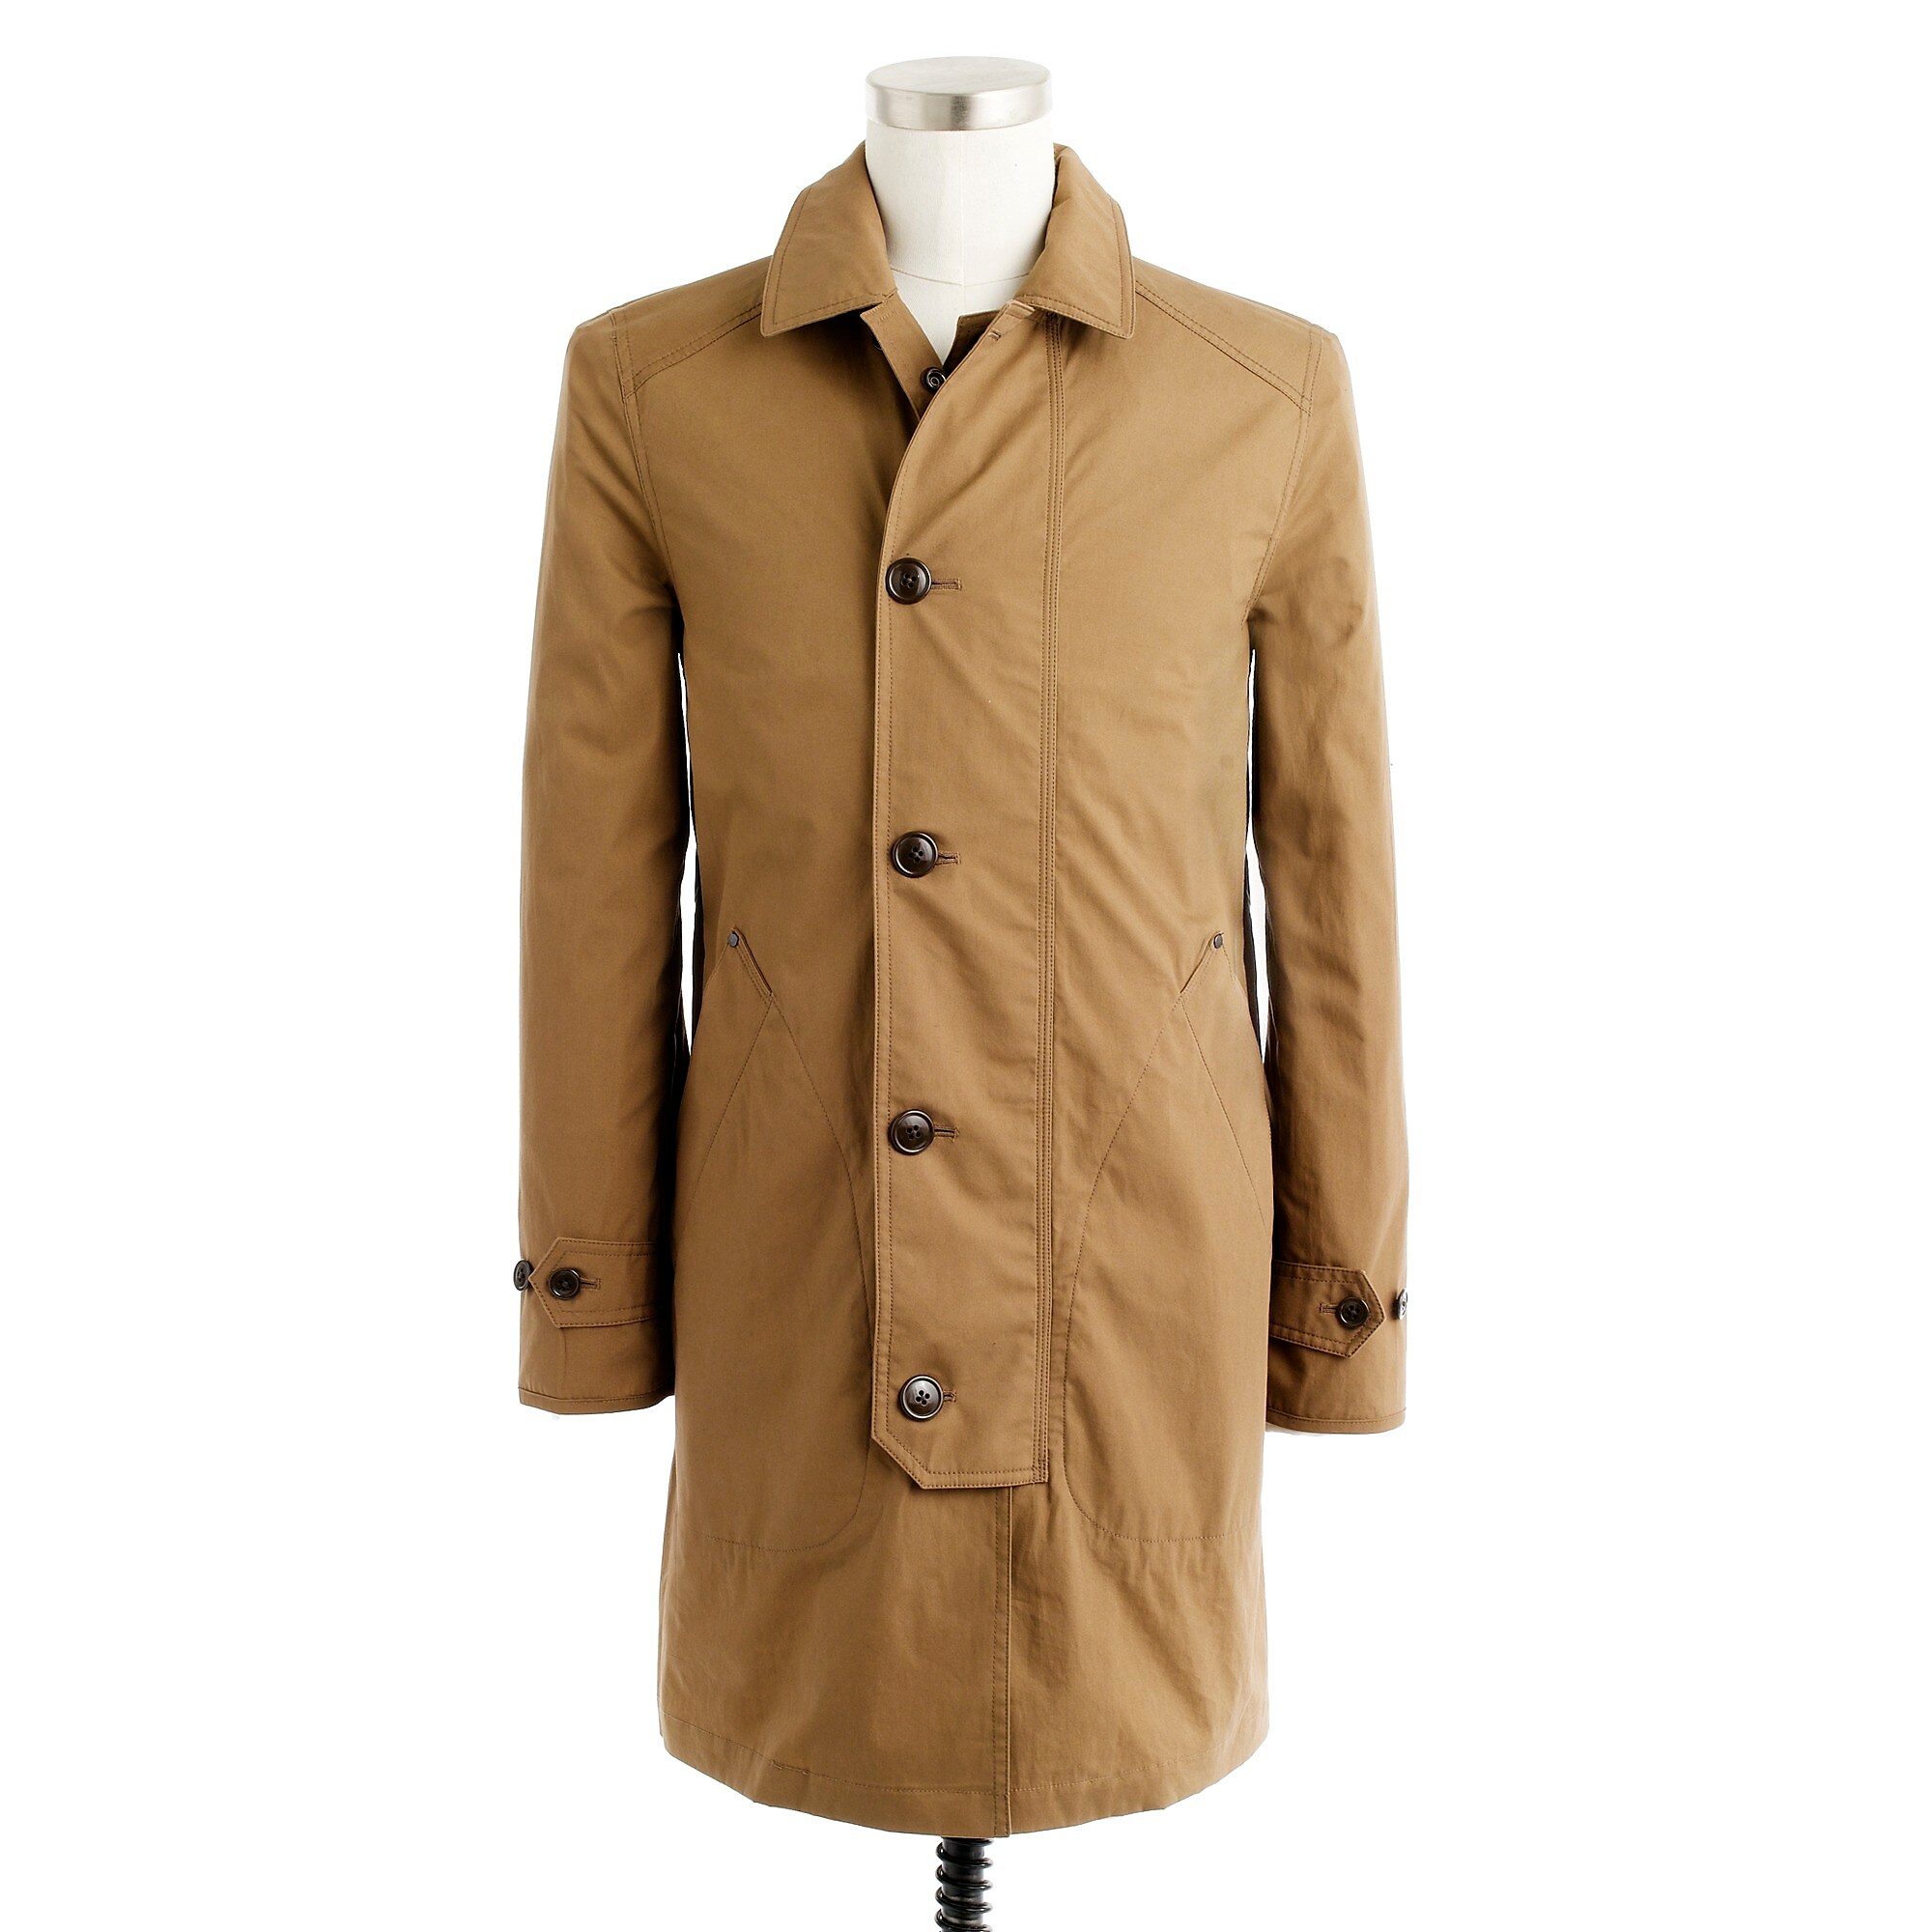 Wedgewood trench : Men transitional jackets | J.Crew